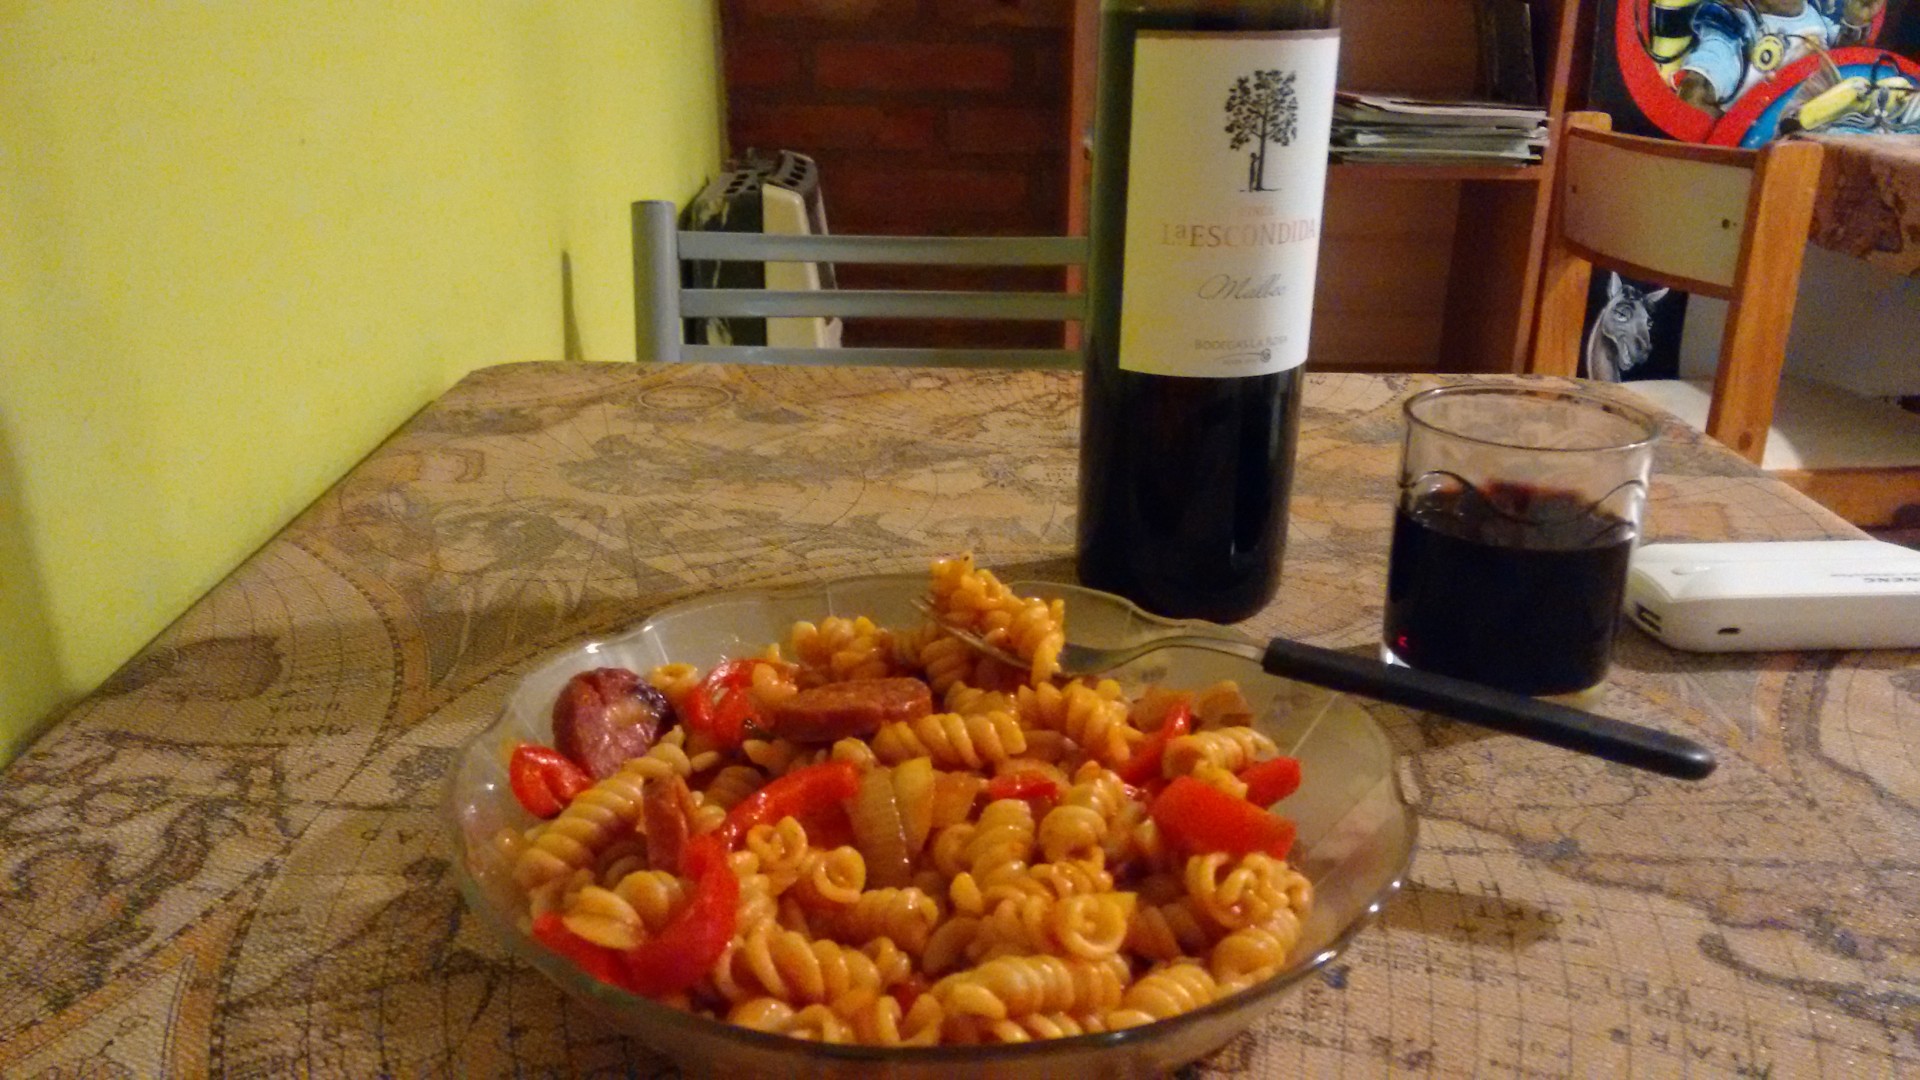 It's a typical evening dinner - with £2 wine!